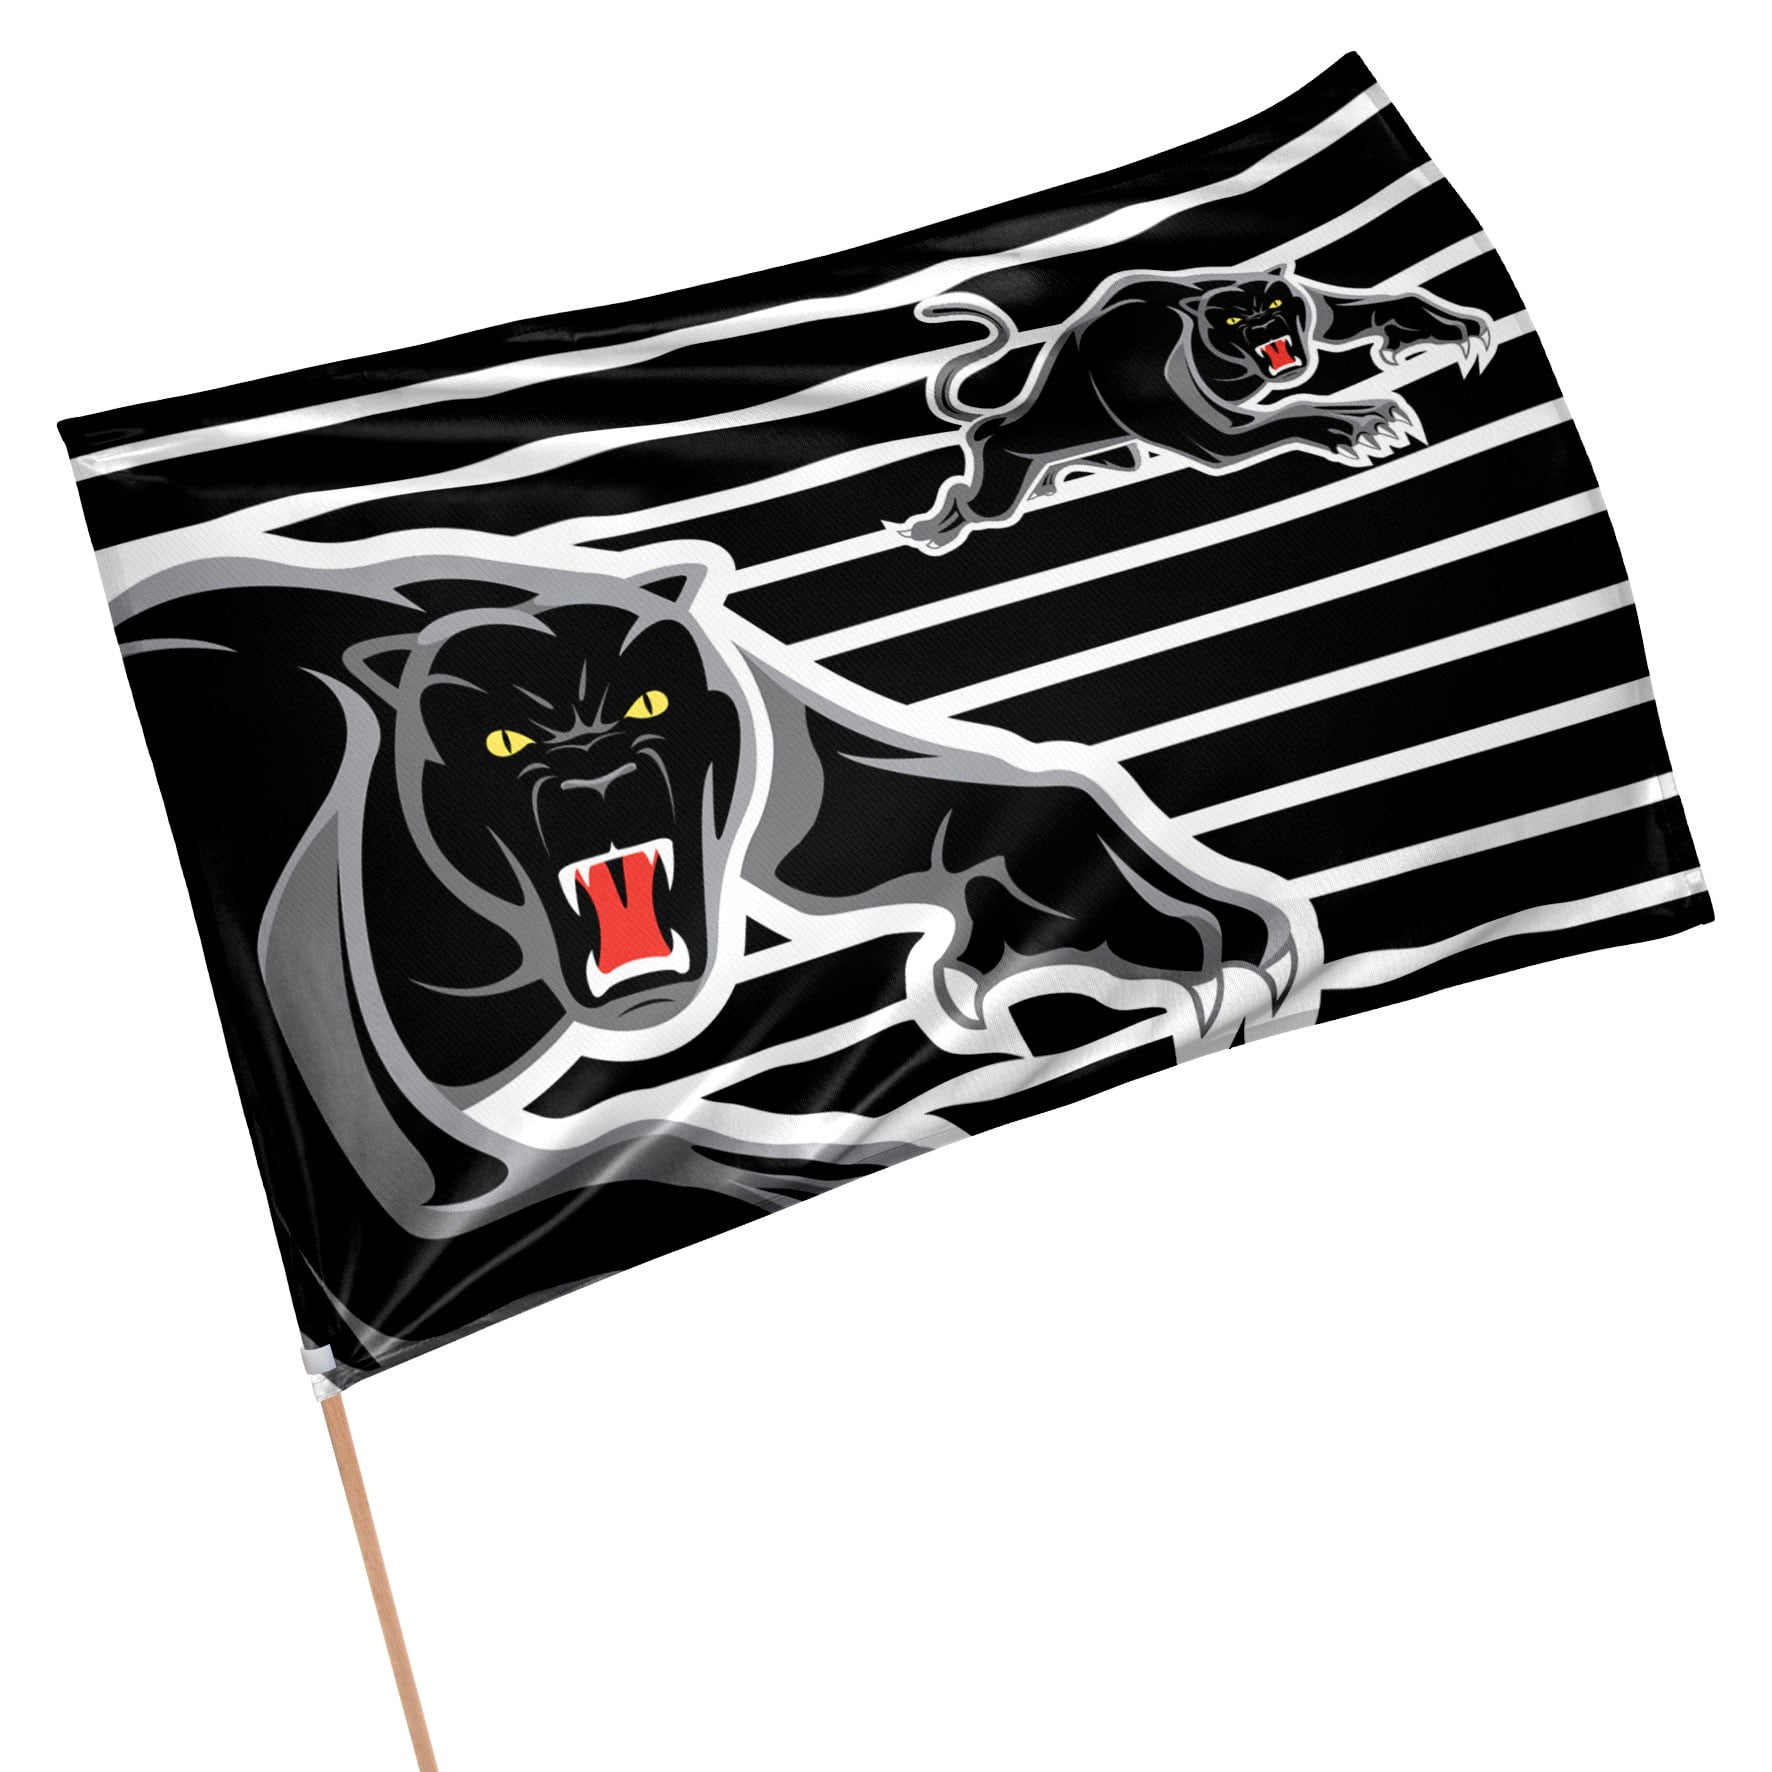 Penrith Panthers NRL GAME DAY Pole Flag Banner